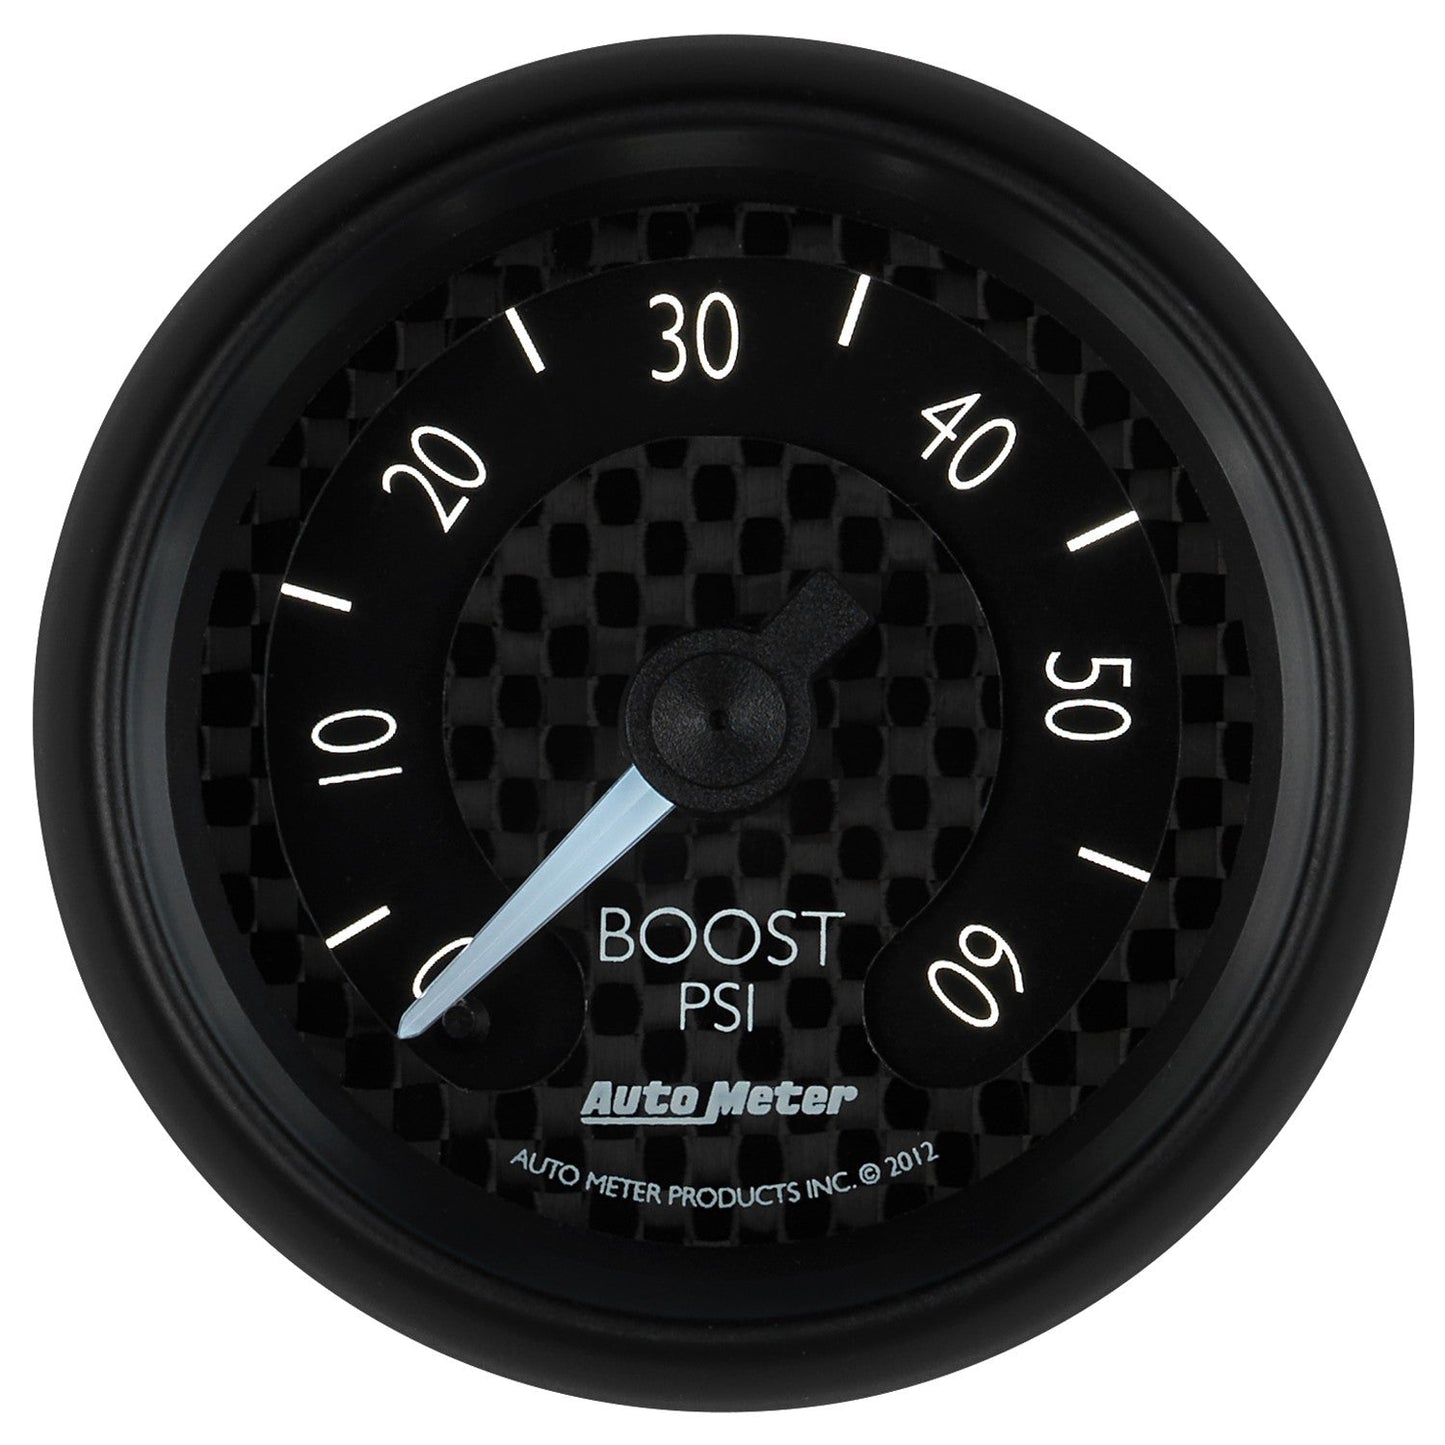 AutoMeter - 2-1/16" BOOST, 0-60 PSI, MECÁNICO, GT (8005)